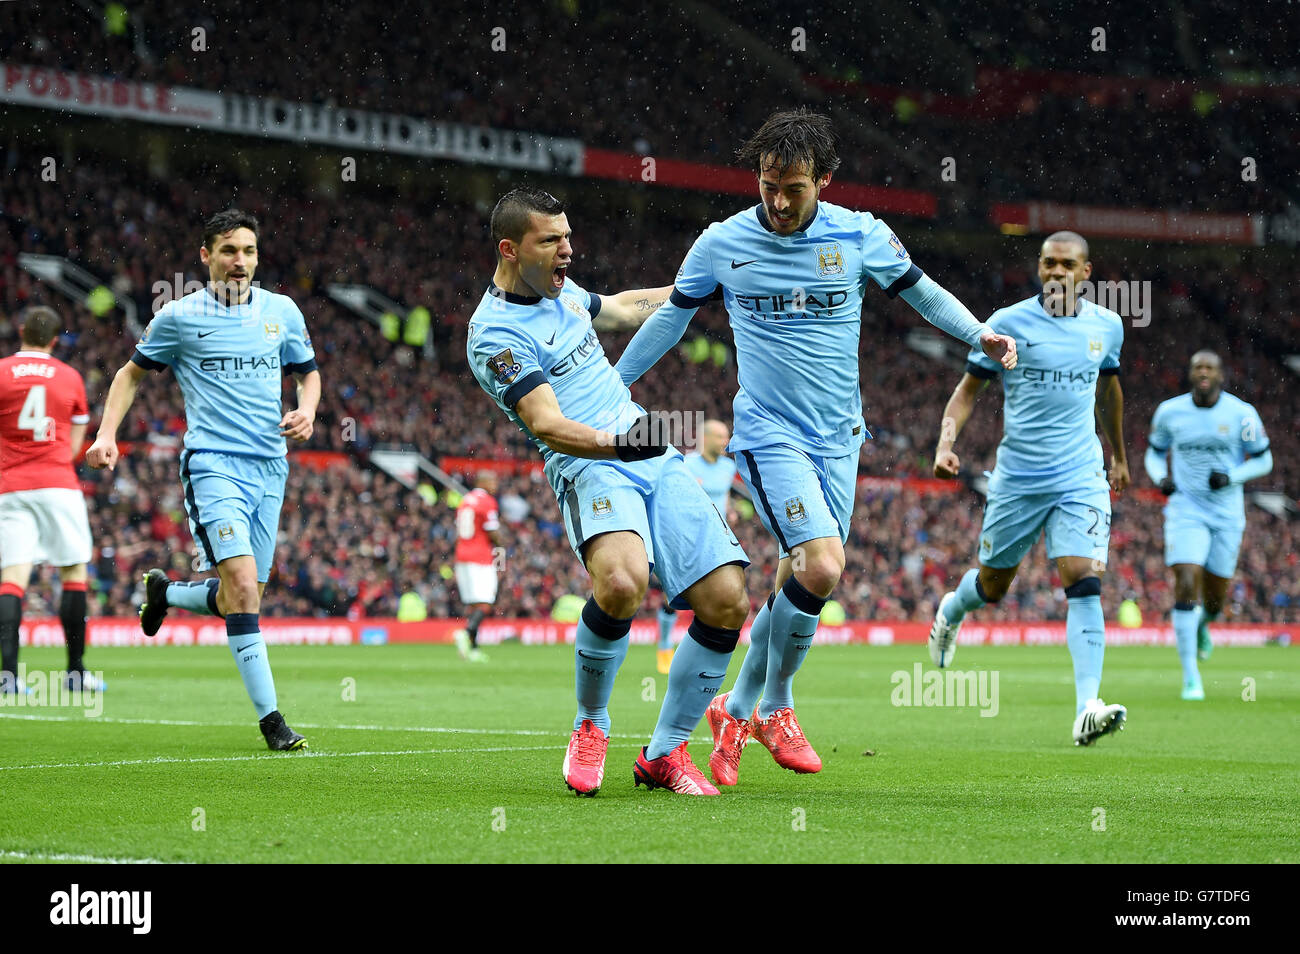 Manchester City's Sergio Aguero (centre) celebrates scoring their first goal of the game with team-mate David Silva during the Barclays Premier League match at Old Trafford, Manchester. PRESS ASSOCIATION Photo. Picture date: Sunday April 12, 2015. See PA story SOCCER Man Utd. Photo credit should read: Martin Rickett/PA Wire. . . Stock Photo